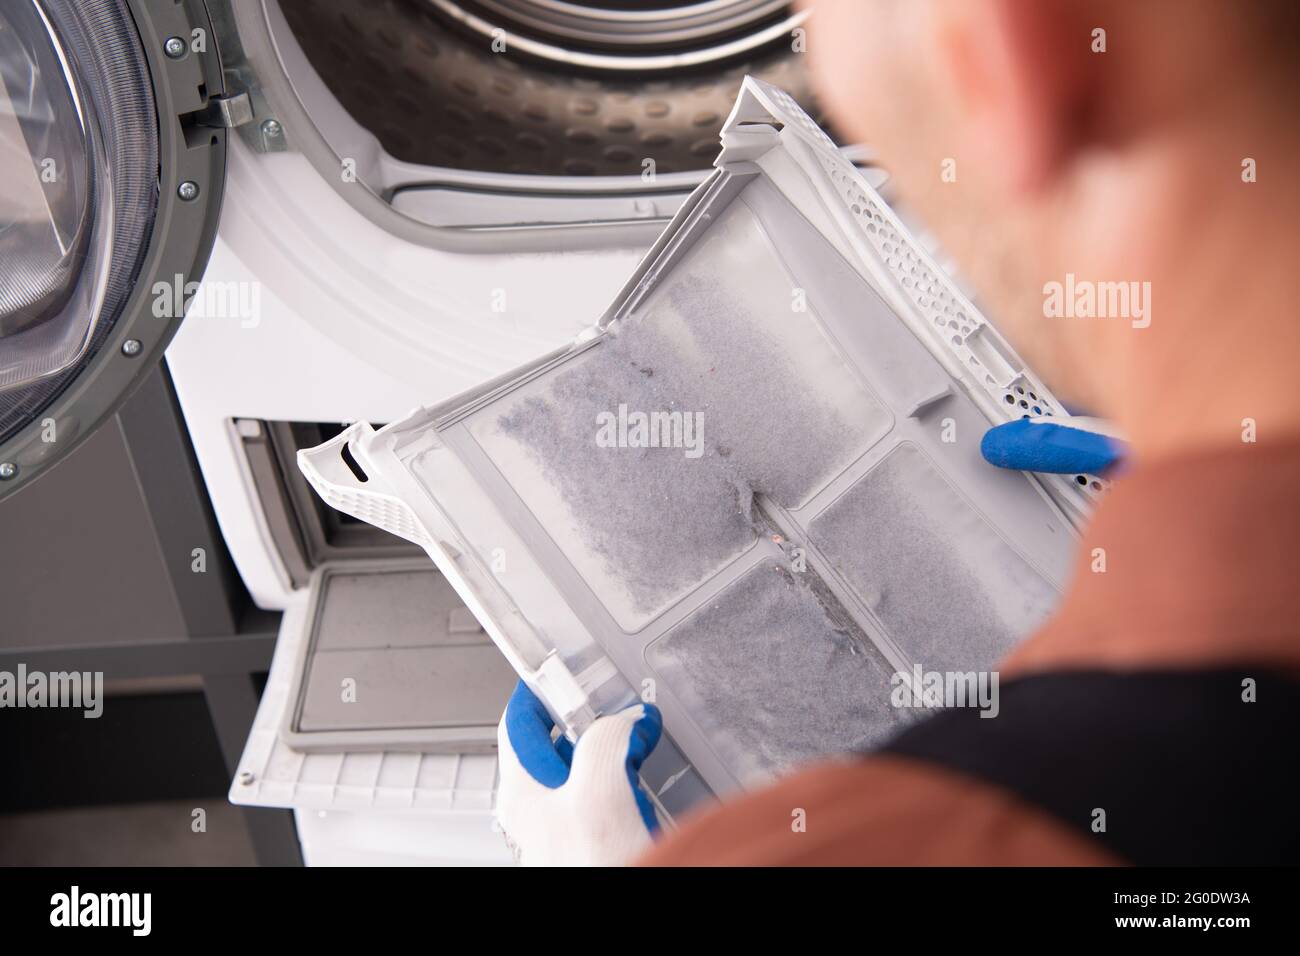 Washing and Dryer Machine Filter Covered by Dirt. Filter Cleaning Performed by Home Appliances Technician. Stock Photo